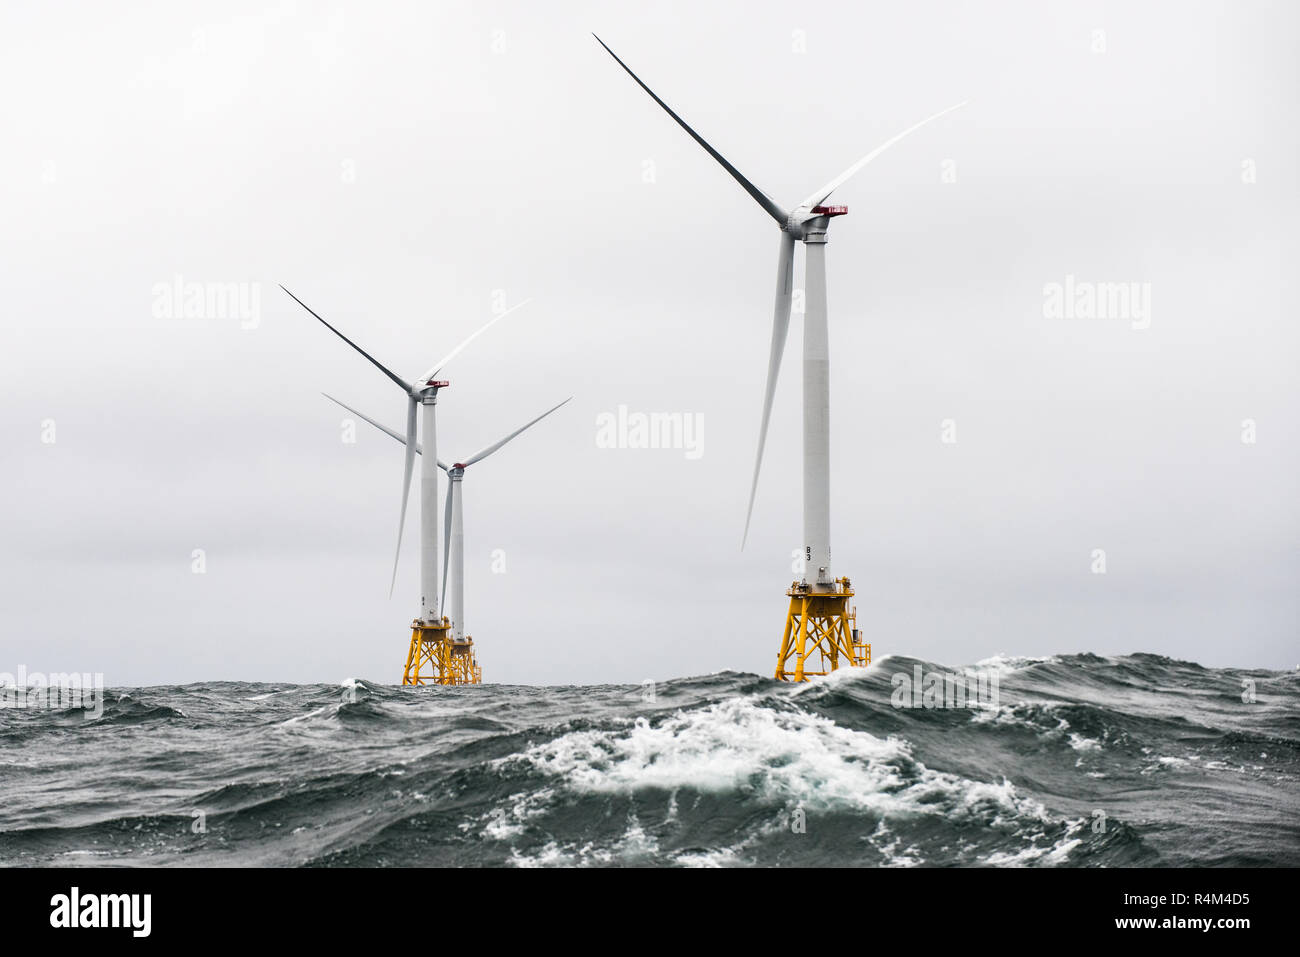 October 1, 2016 - Heavy seas engulf the Block Island Wind Farm, the first US offshore wind farm. The five Halide 6MW turbines were recently installed by Deepwater Wind, and are currently under commissioning. (Photo by Dennis Schroeder / NREL) Offshore wind power or offshore wind energy is the use of wind farms constructed in bodies of water, usually in the ocean on the continental shelf, to harvest wind energy to generate electricity. Higher wind speeds are available offshore compared to on land, so offshore wind power’s electricity generation is higher per amount of capacity installed, Stock Photo